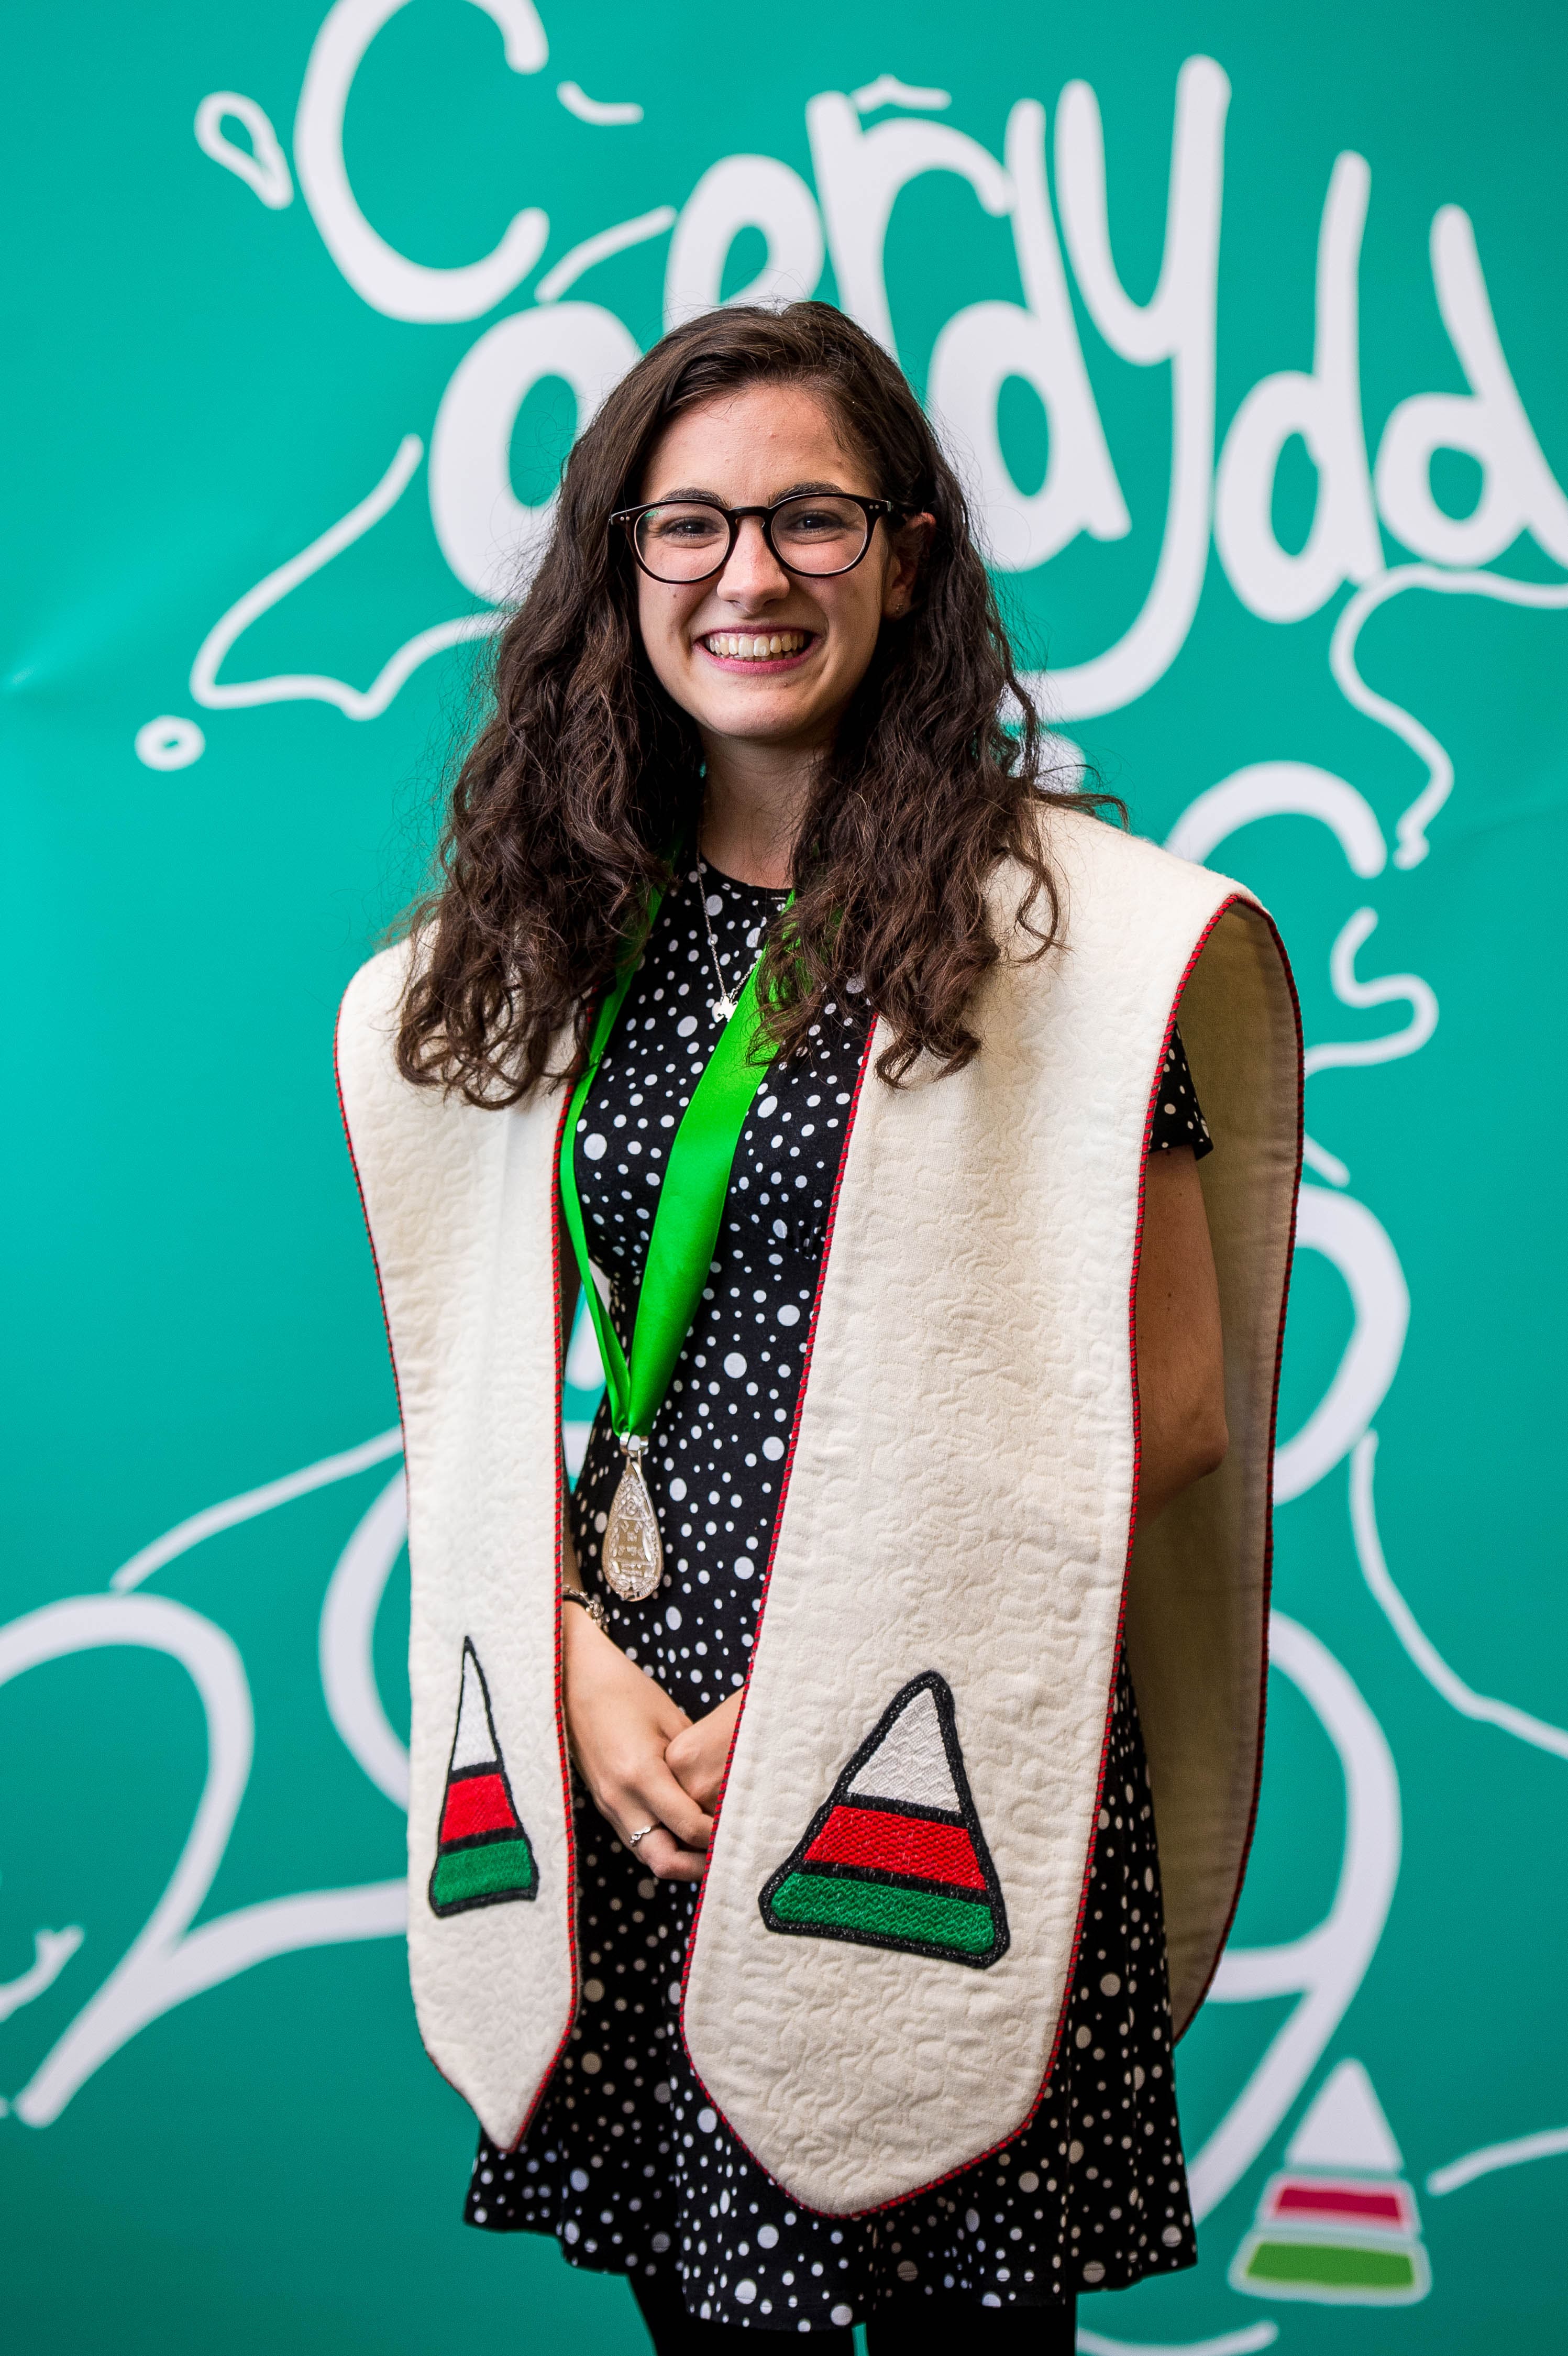 Francesca Schiarillo was the winner of the 2019 Learners Medal at the Urdd Eisteddfod